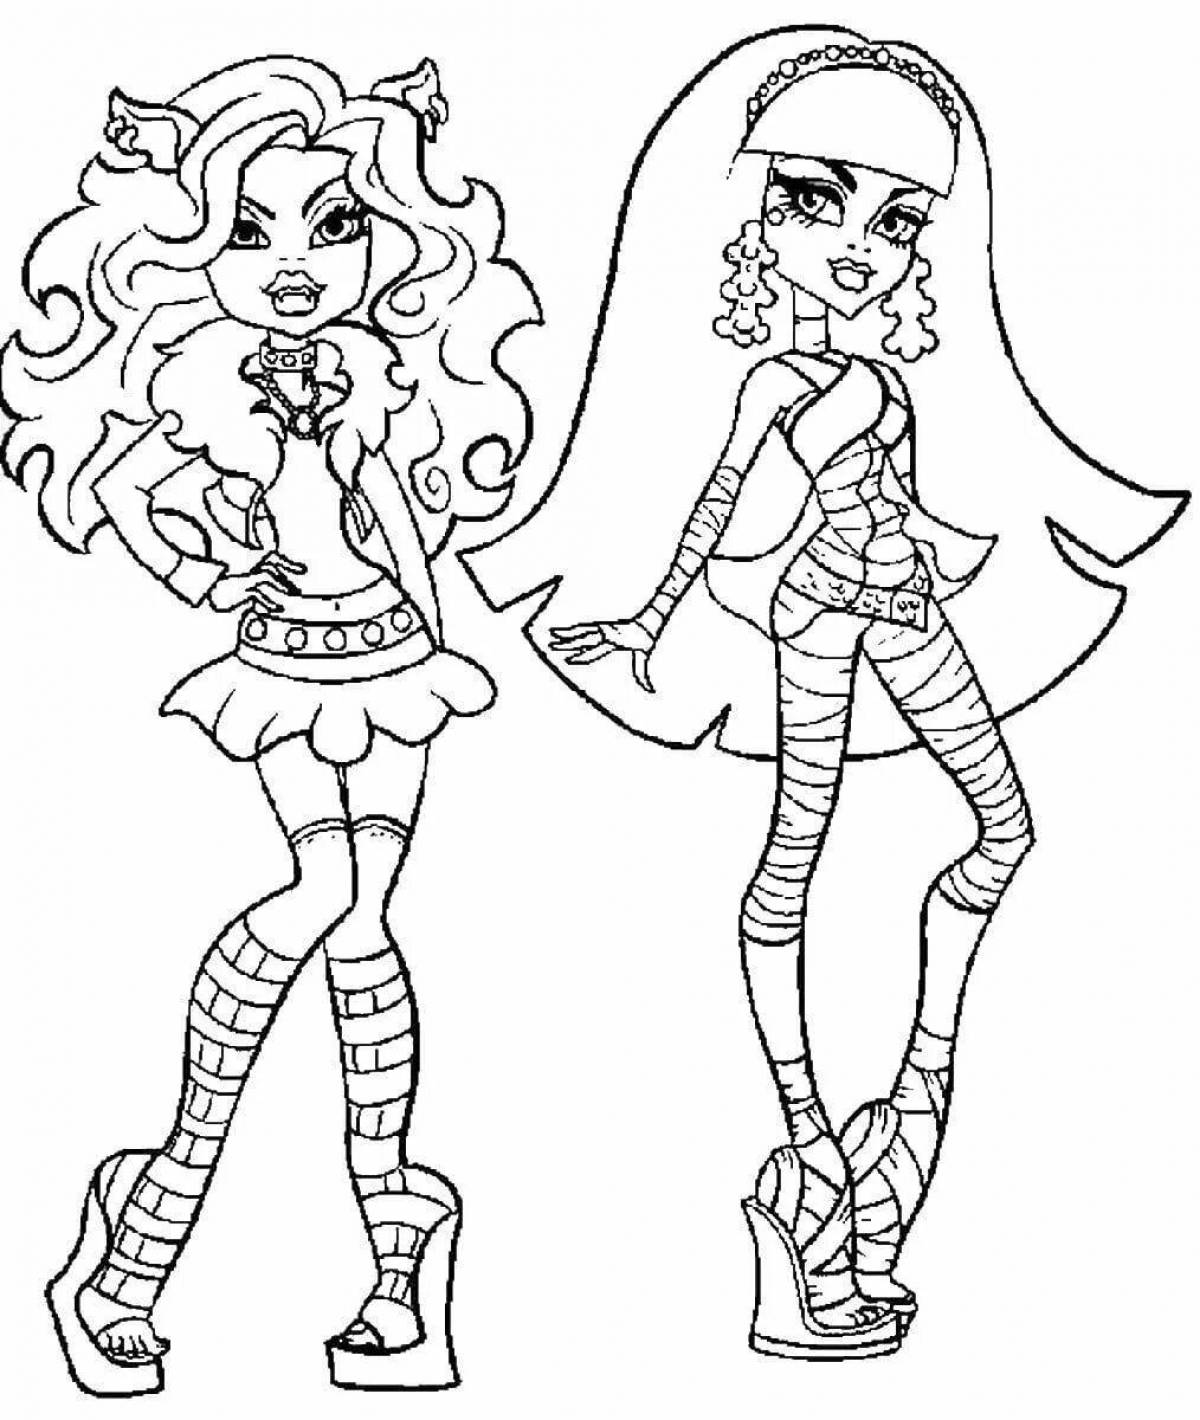 Monster high glowing coloring page